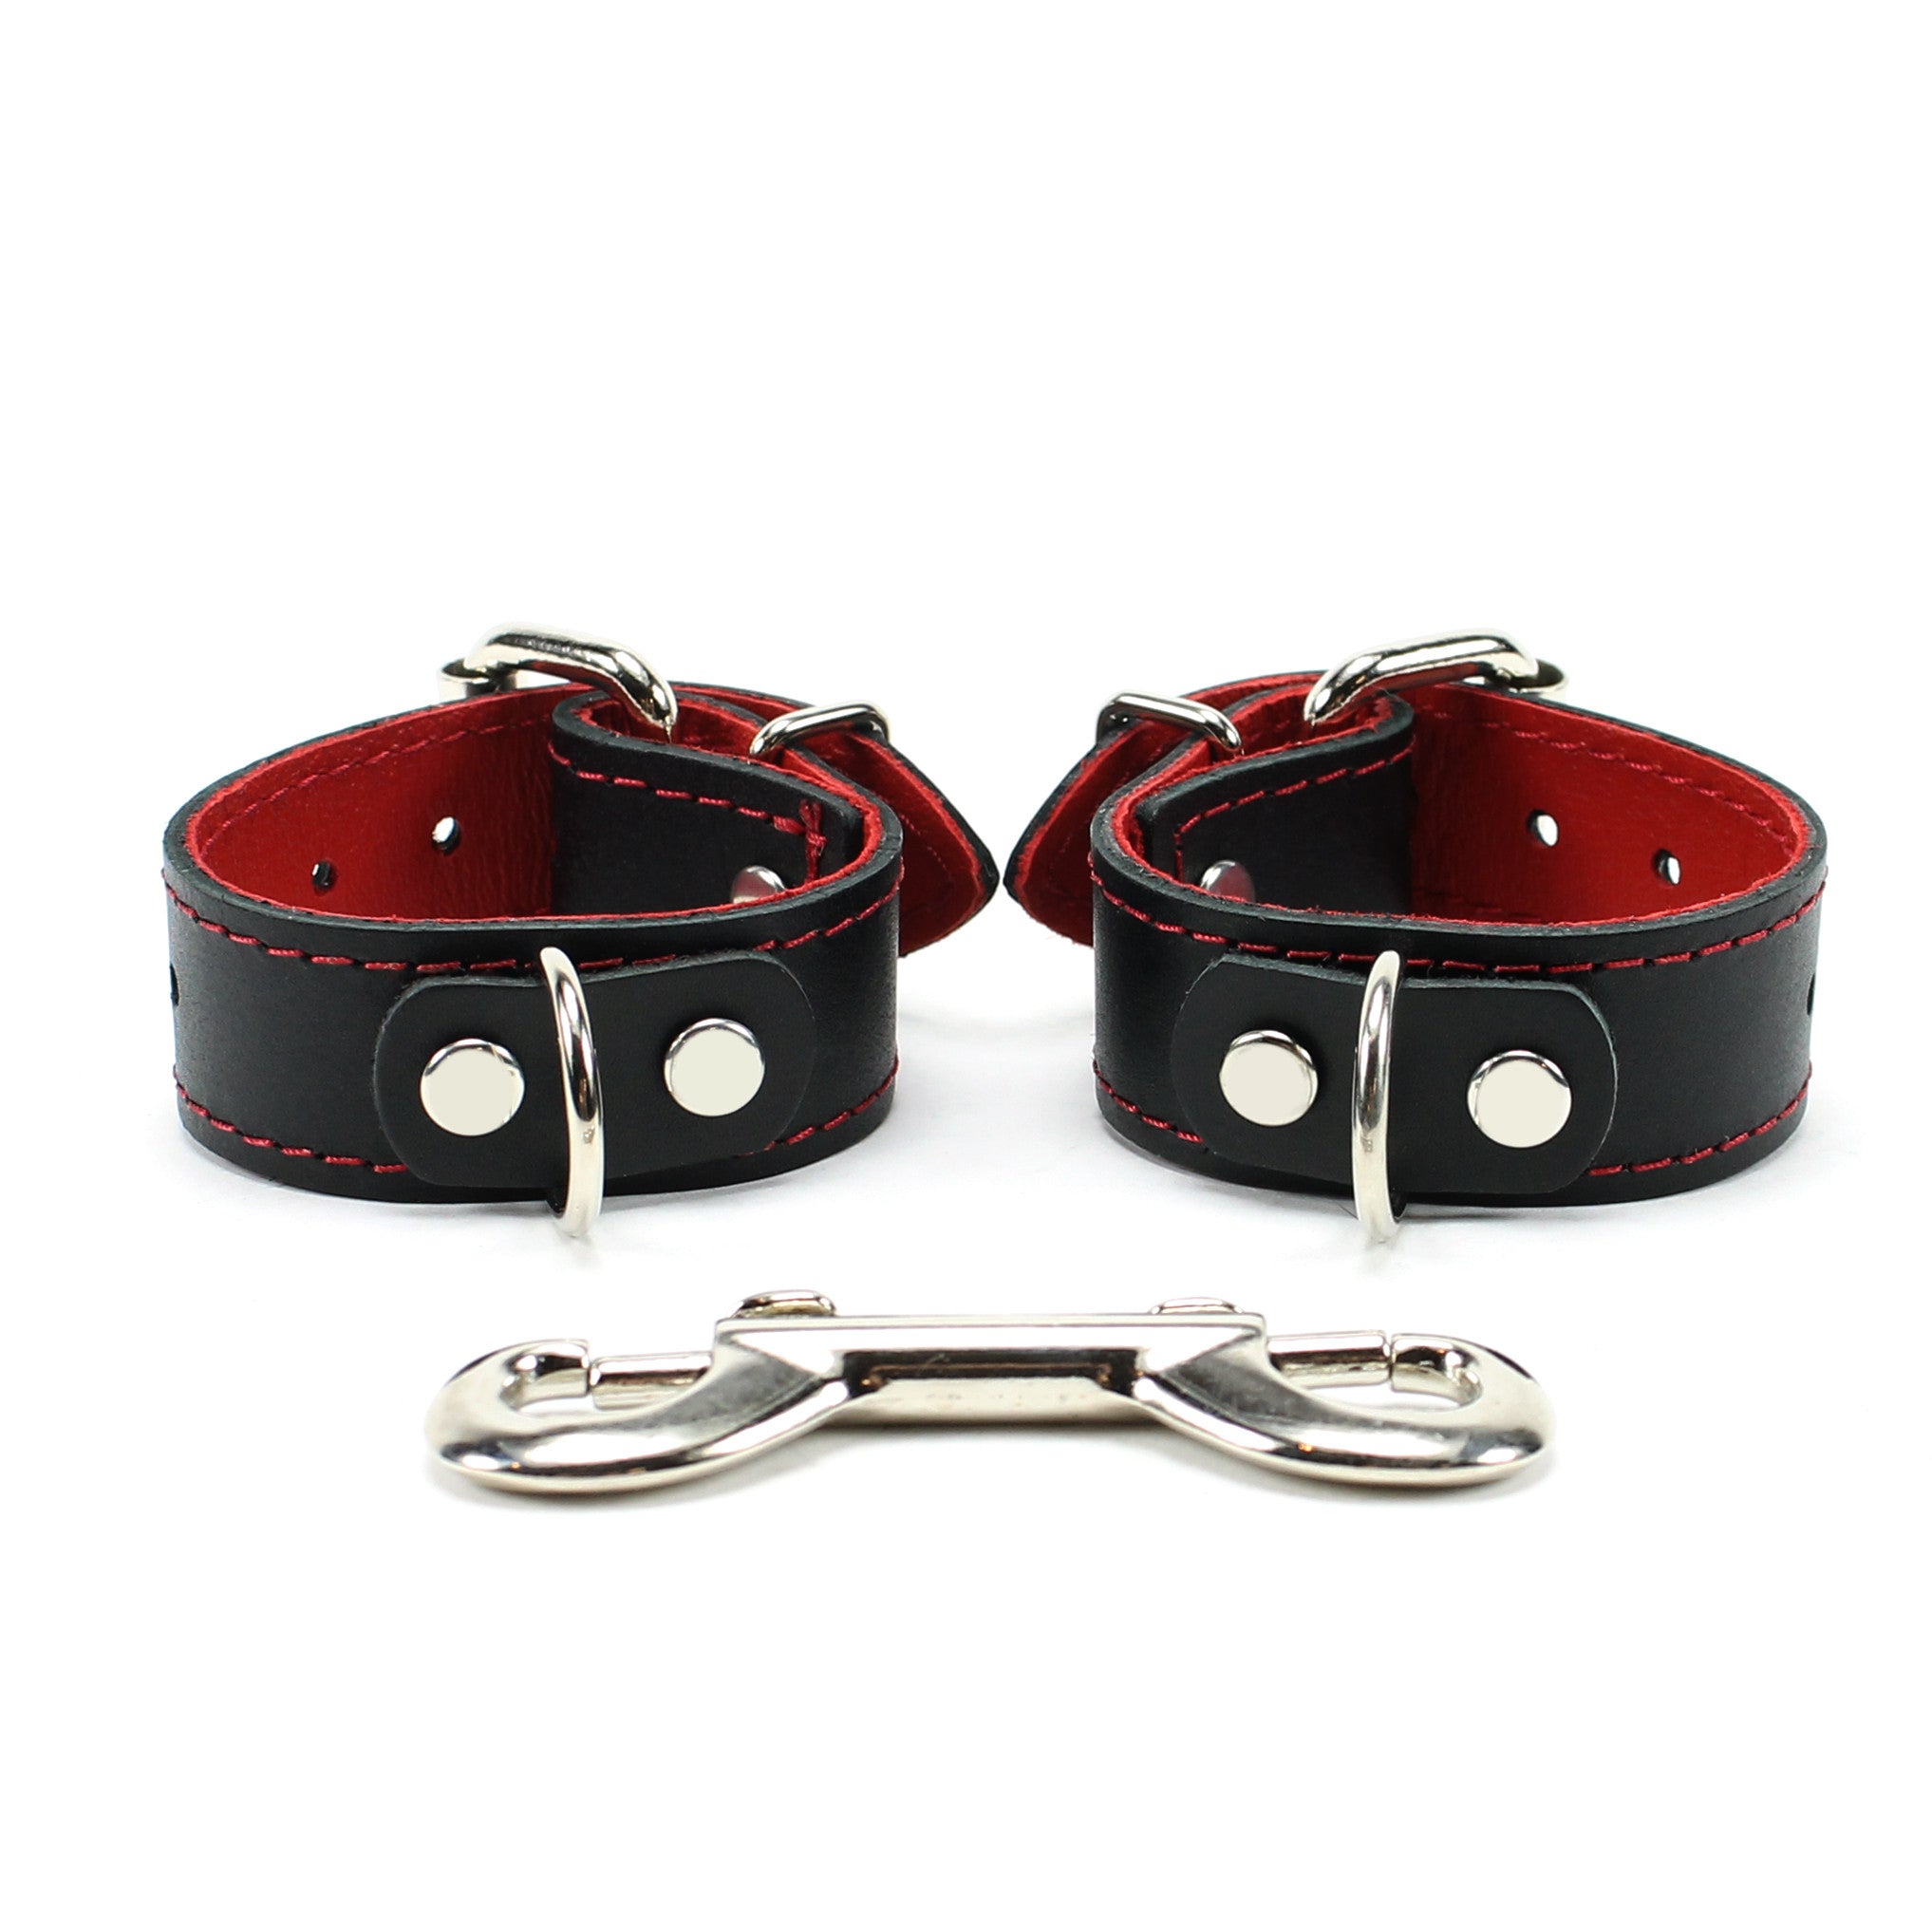 1-inch wide red padded leather BDSM cuffs